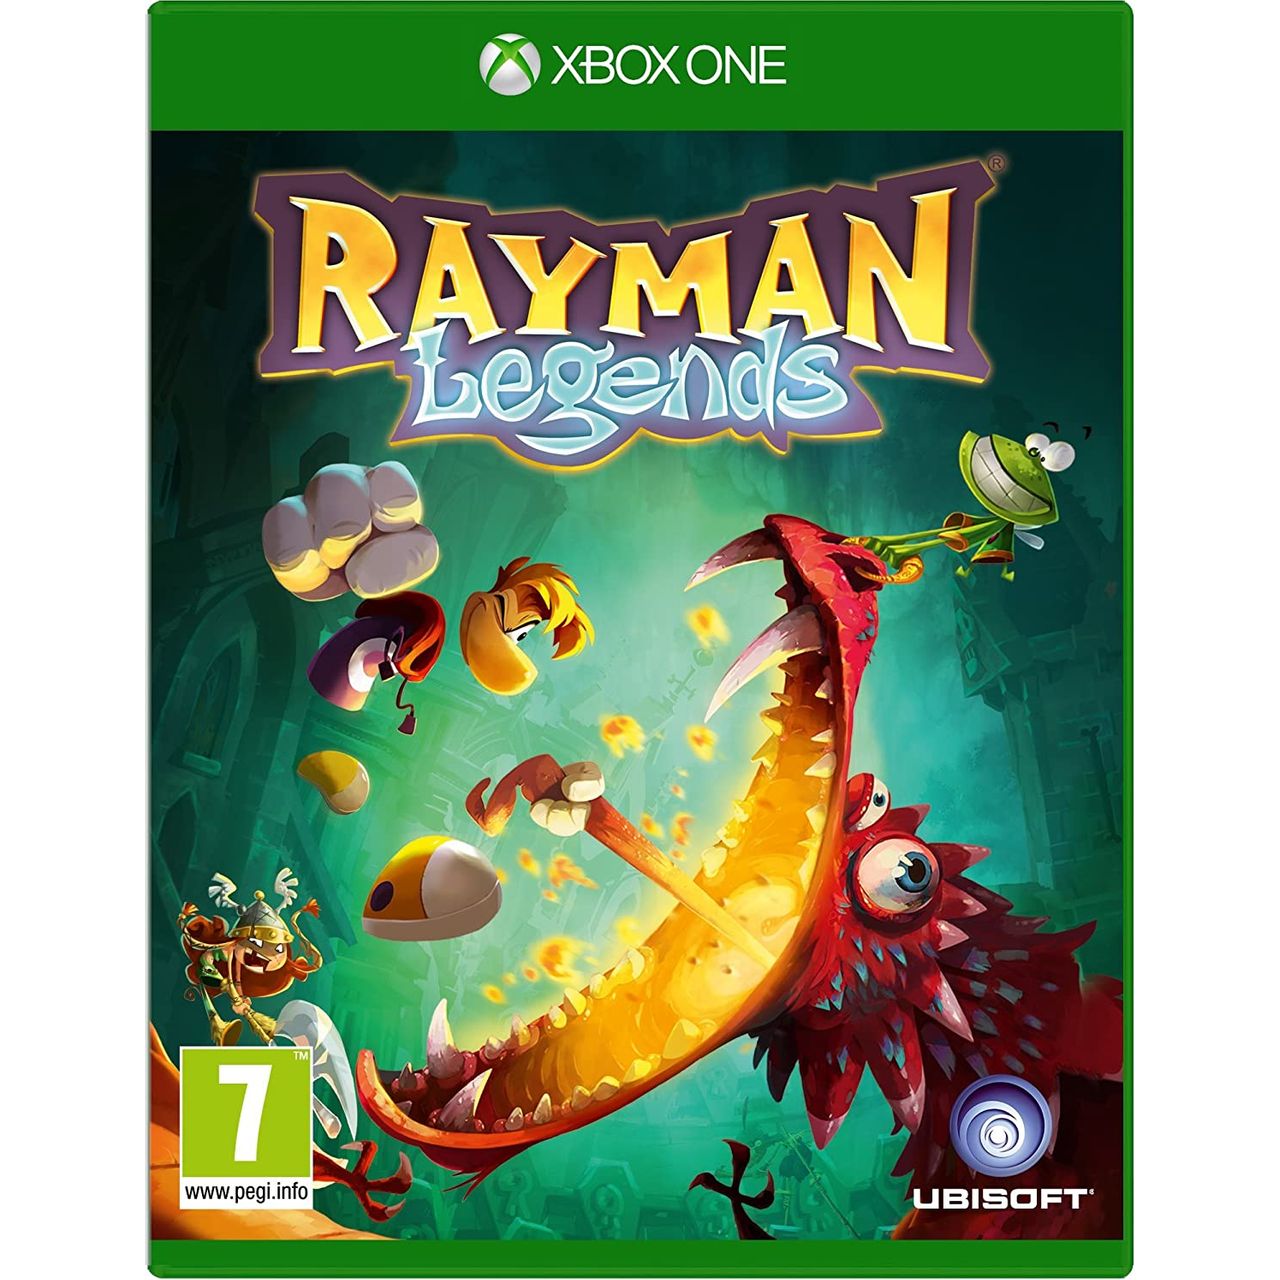 Rayman Legends for Xbox One [Enhanced for Xbox One X] Review